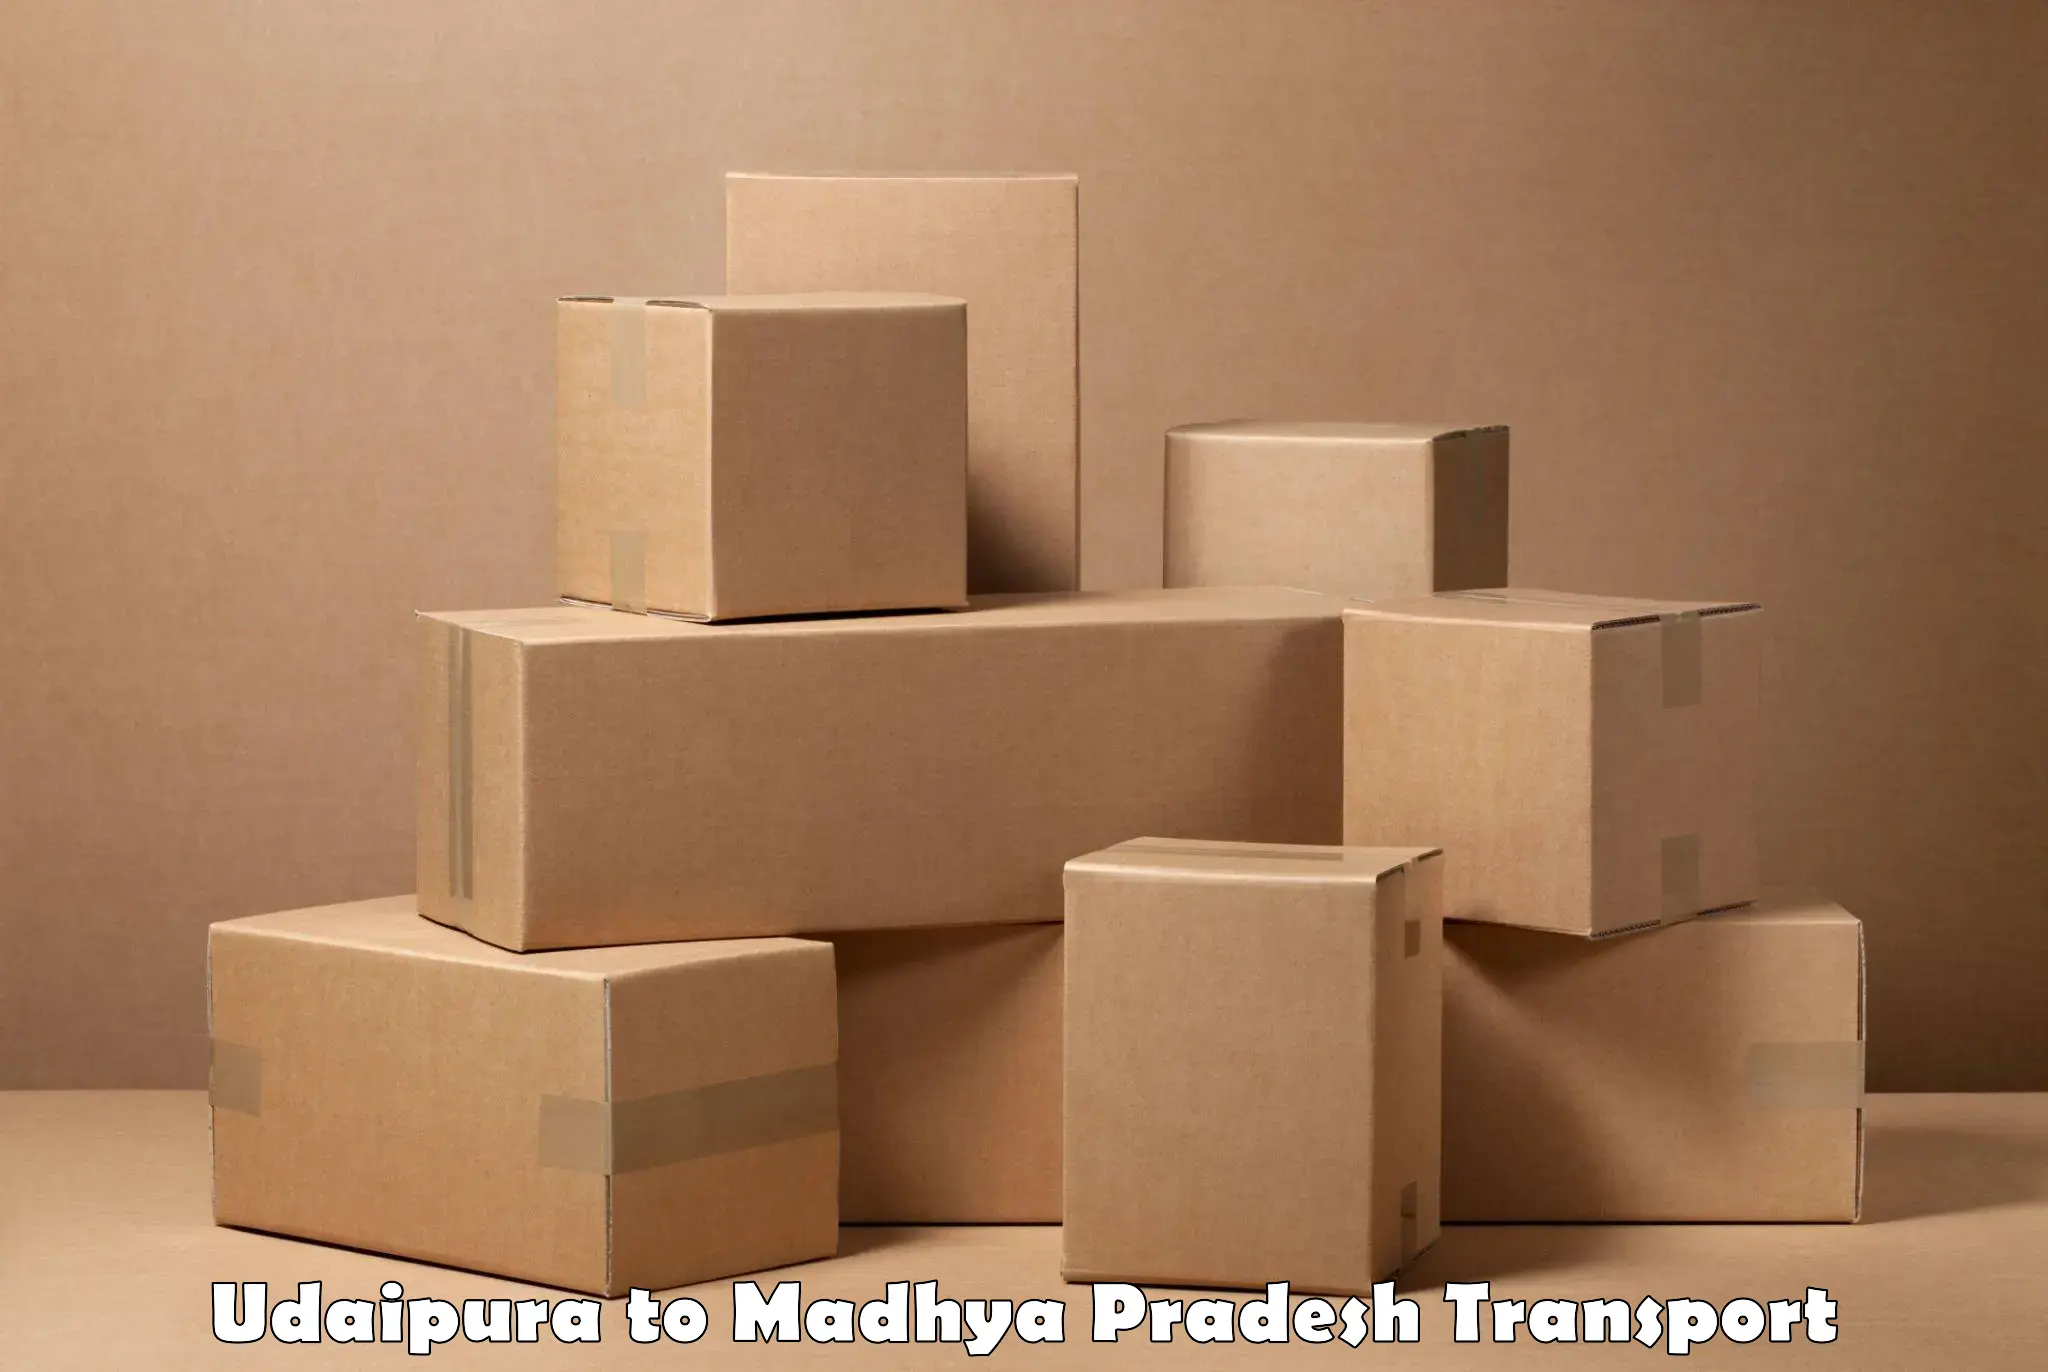 Daily parcel service transport in Udaipura to Chhindwara